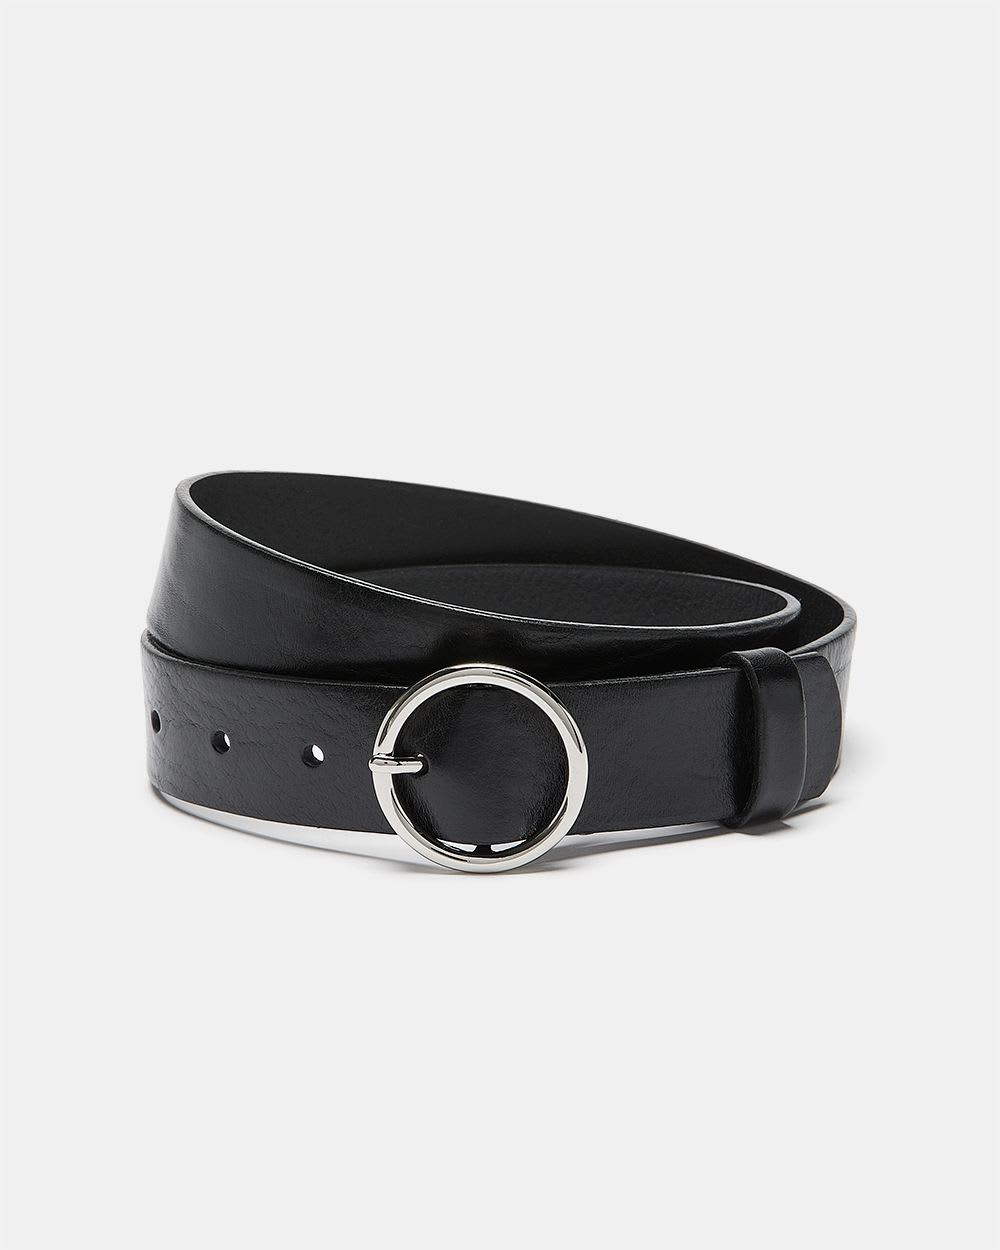 Leather Belt with Round Buckle | RW&CO.